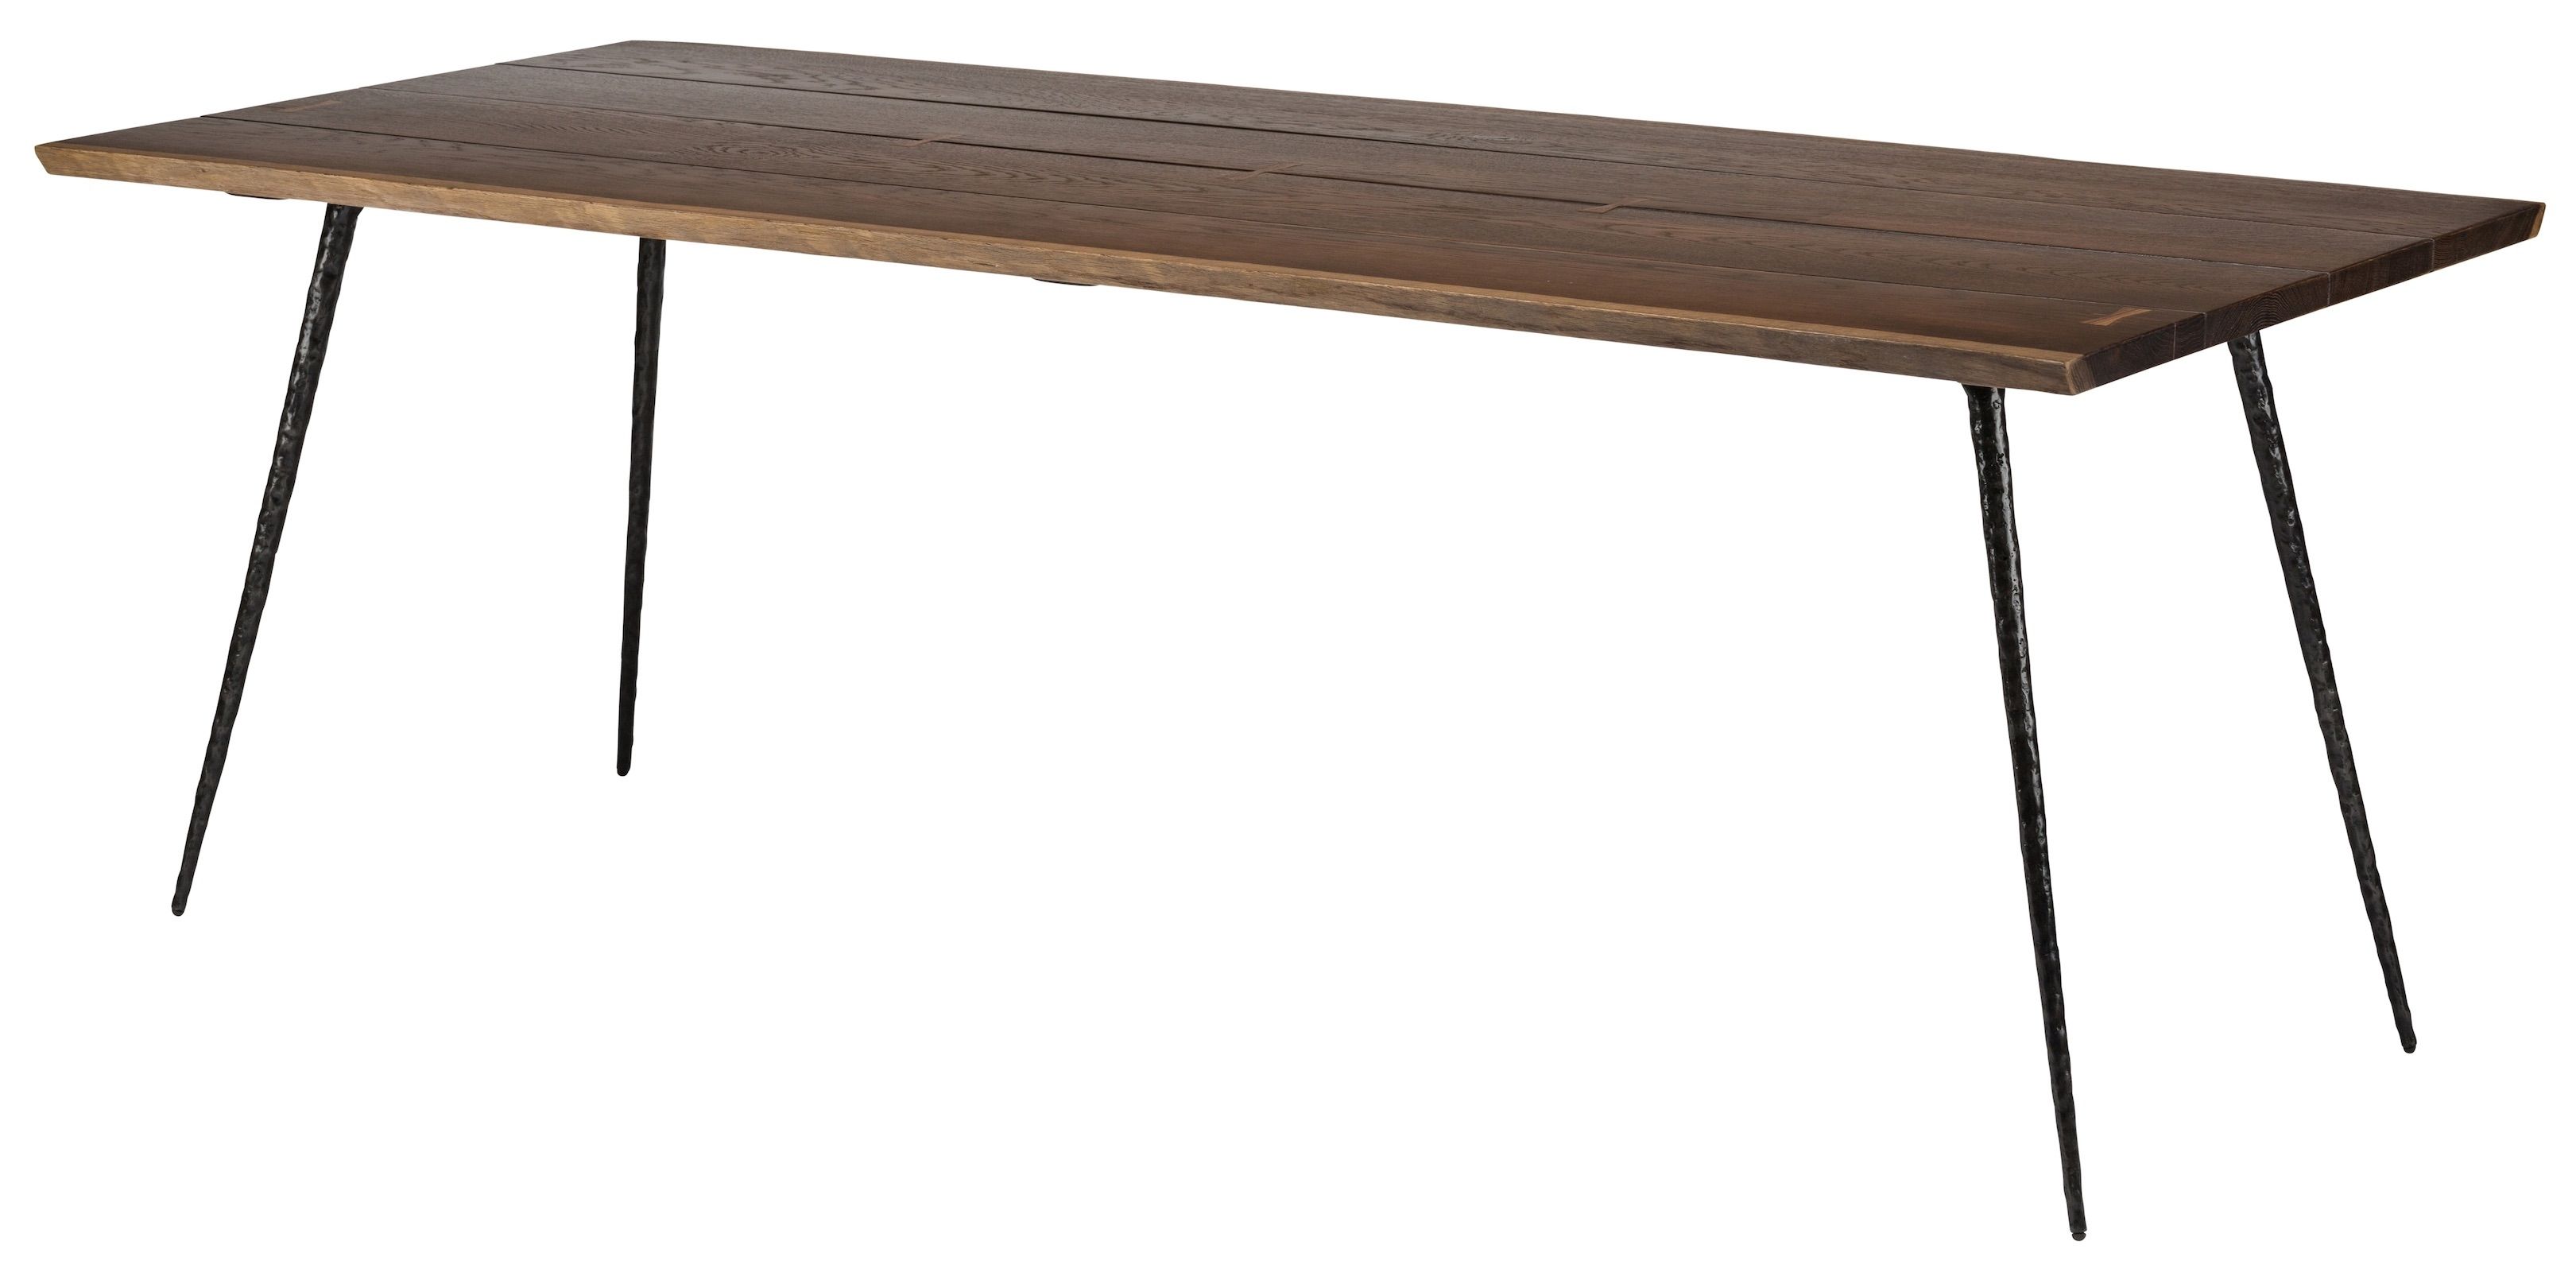 Nexa 78 Inch Dining Table In Seared Oaknuevo – Hgsr651 In Latest Portland 78 Inch Dining Tables (View 8 of 20)